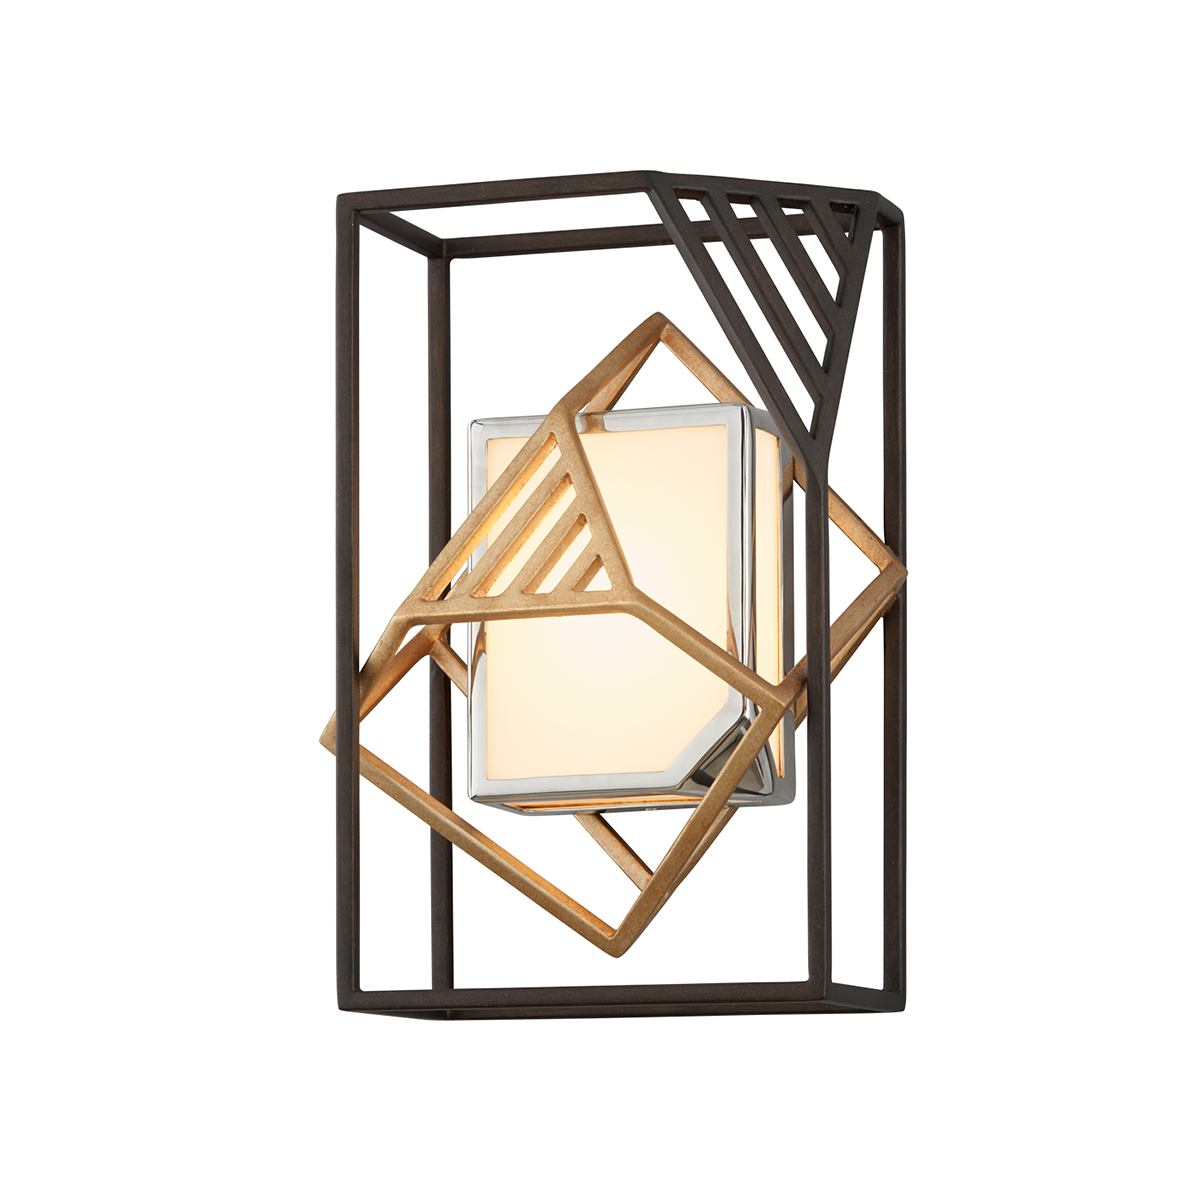 Hudson Valley Lighting Cubist Wall Light in Hand-Worked Iron